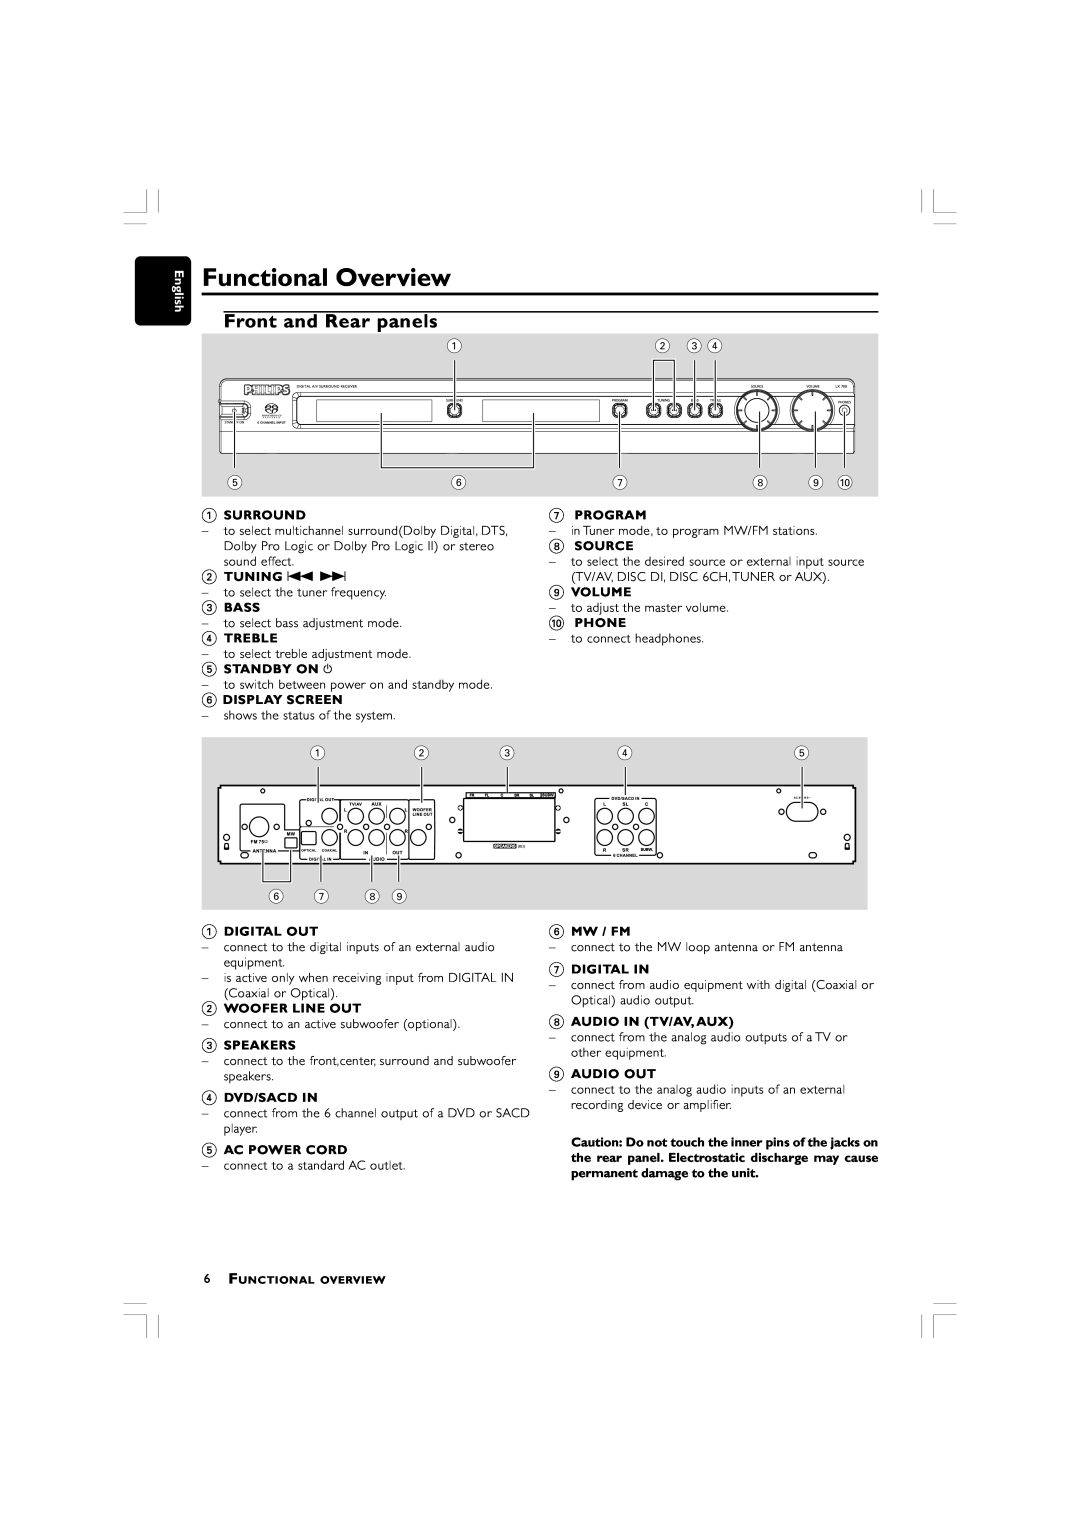 Philips LX700 manual Functional Overview, Front and Rear panels 